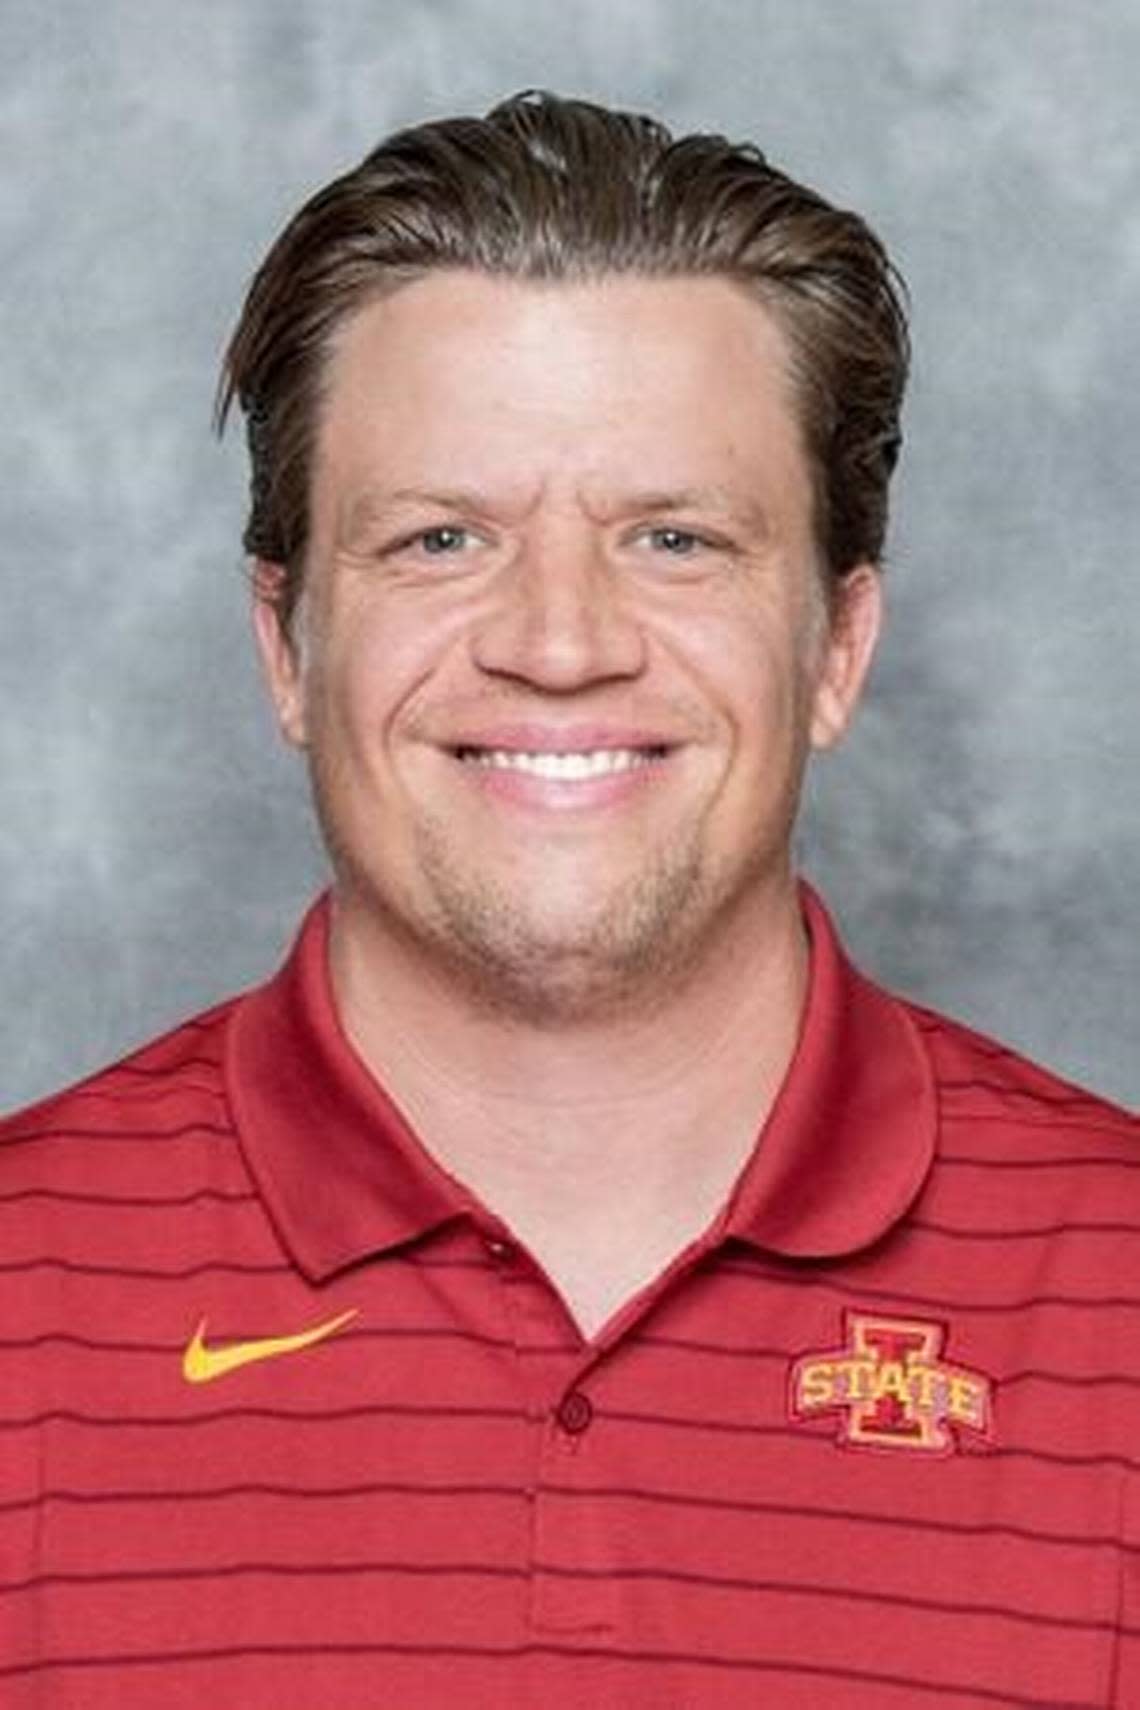 Iowa State assistant coach Billy Fennelly